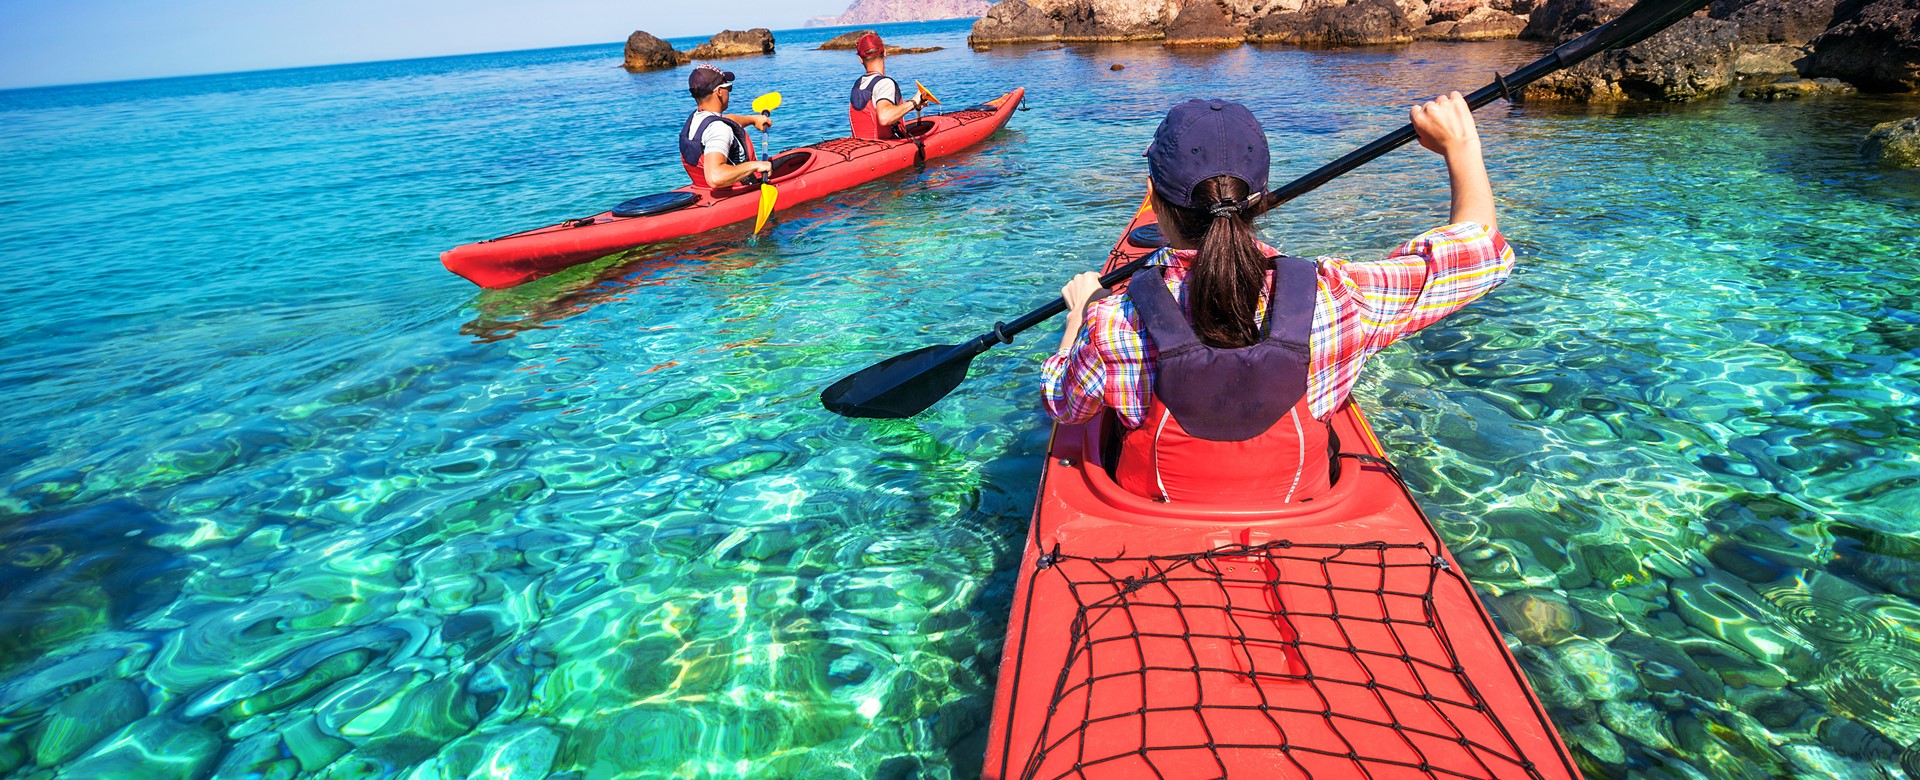 Sea Kayaking around the coast and crystal clear blue waters of Kefalonia, Greek Islands